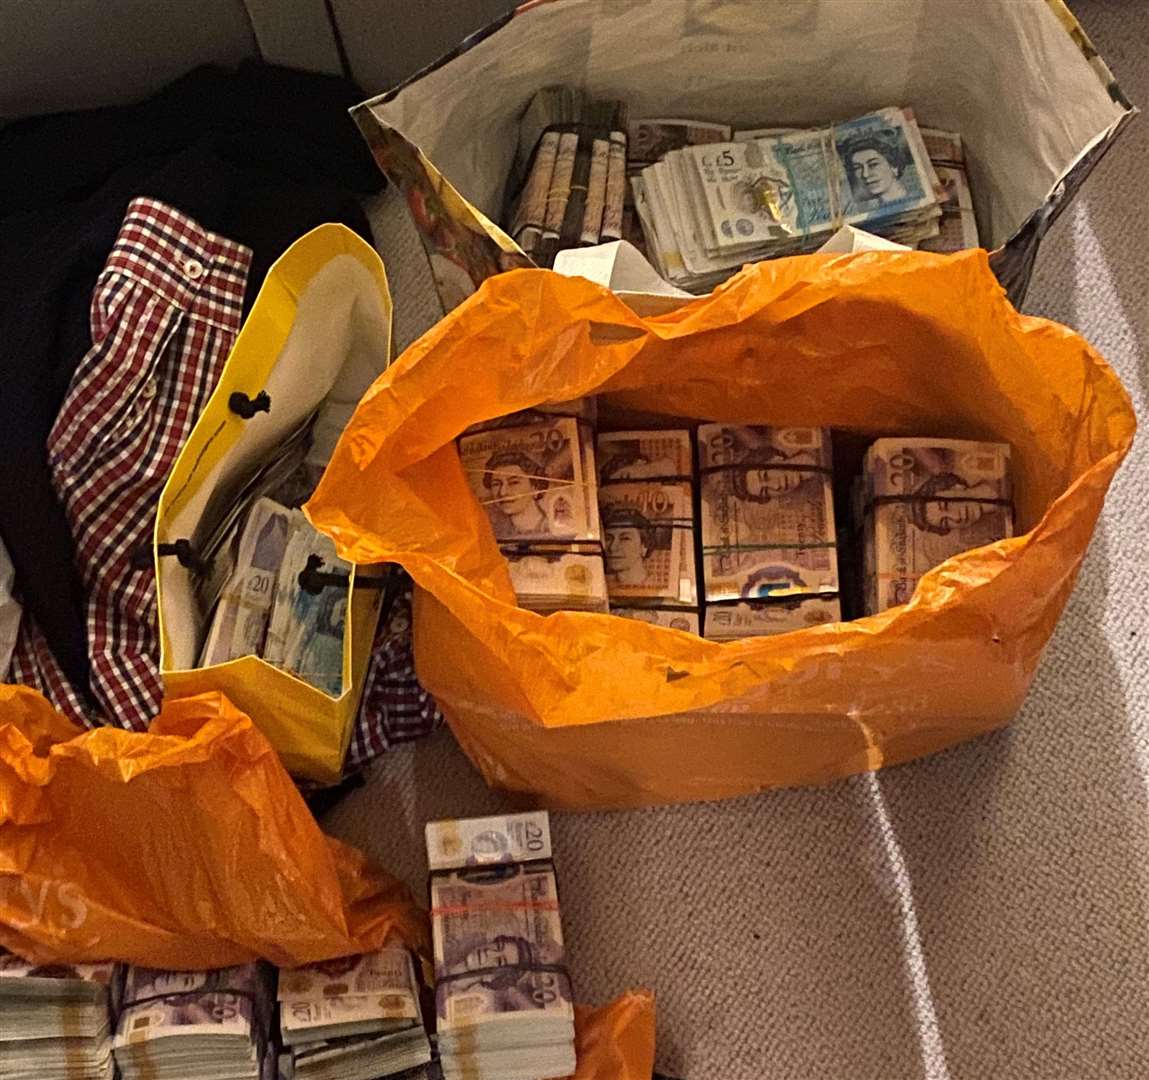 Cash was found stashed in bags for life